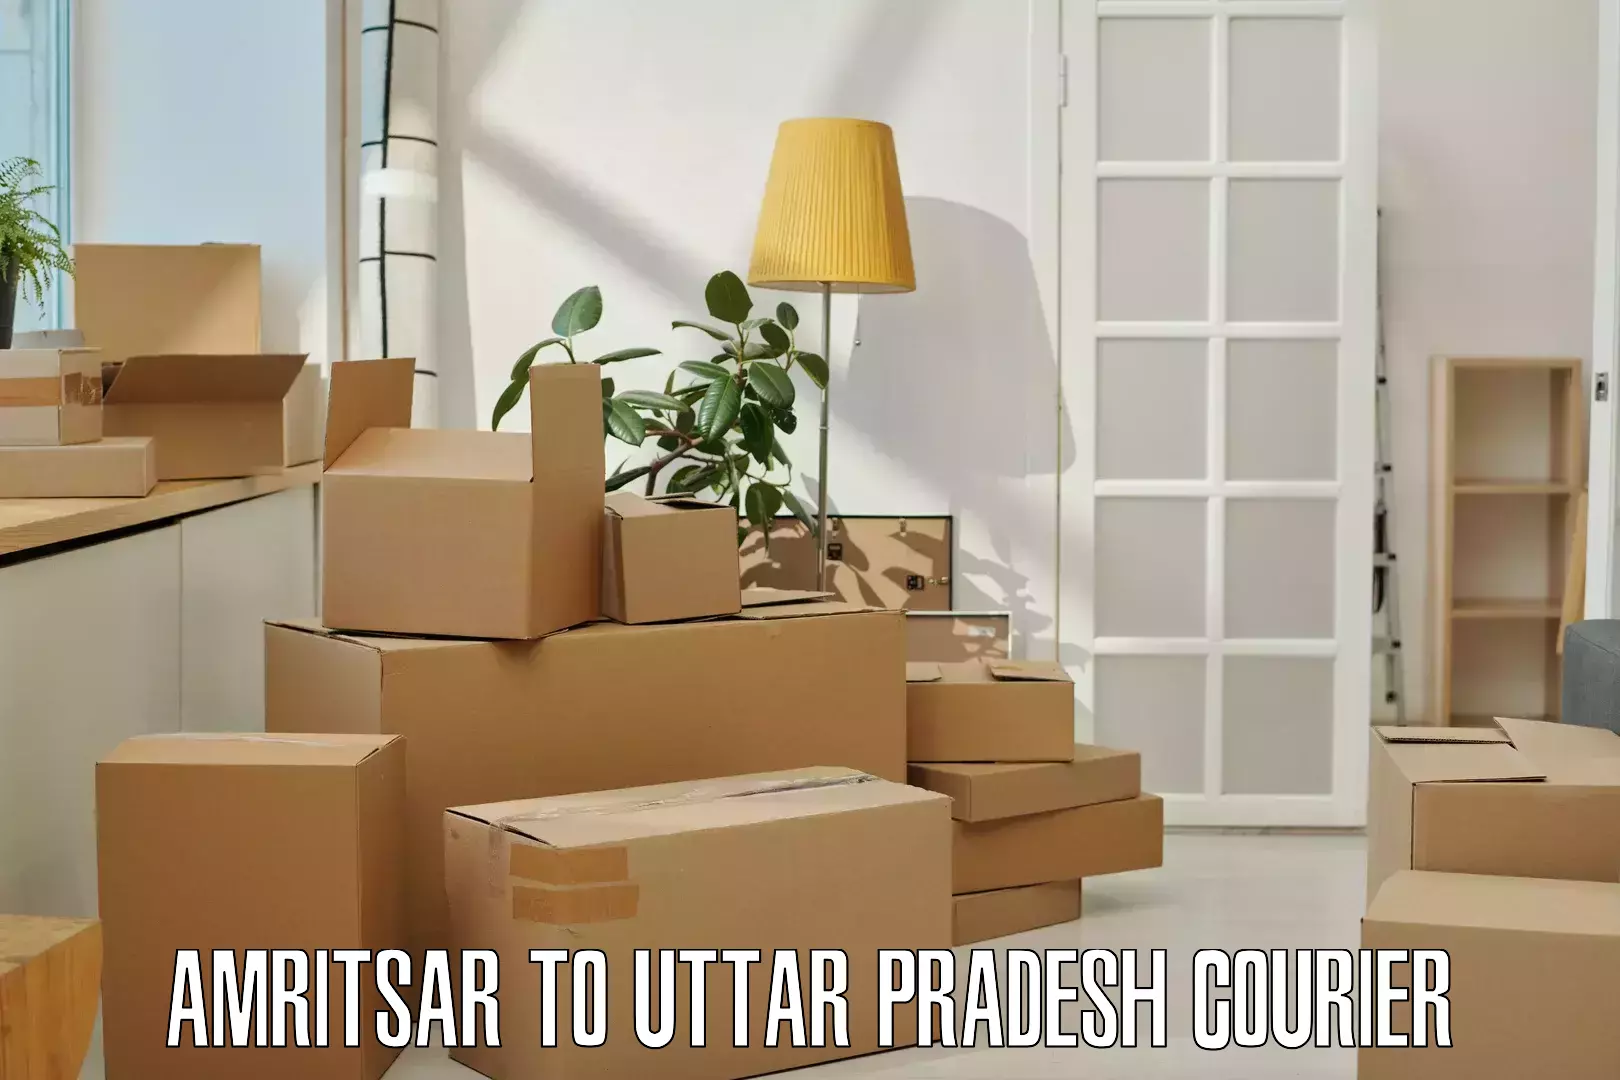 Full-service courier options Amritsar to Mohammadabad